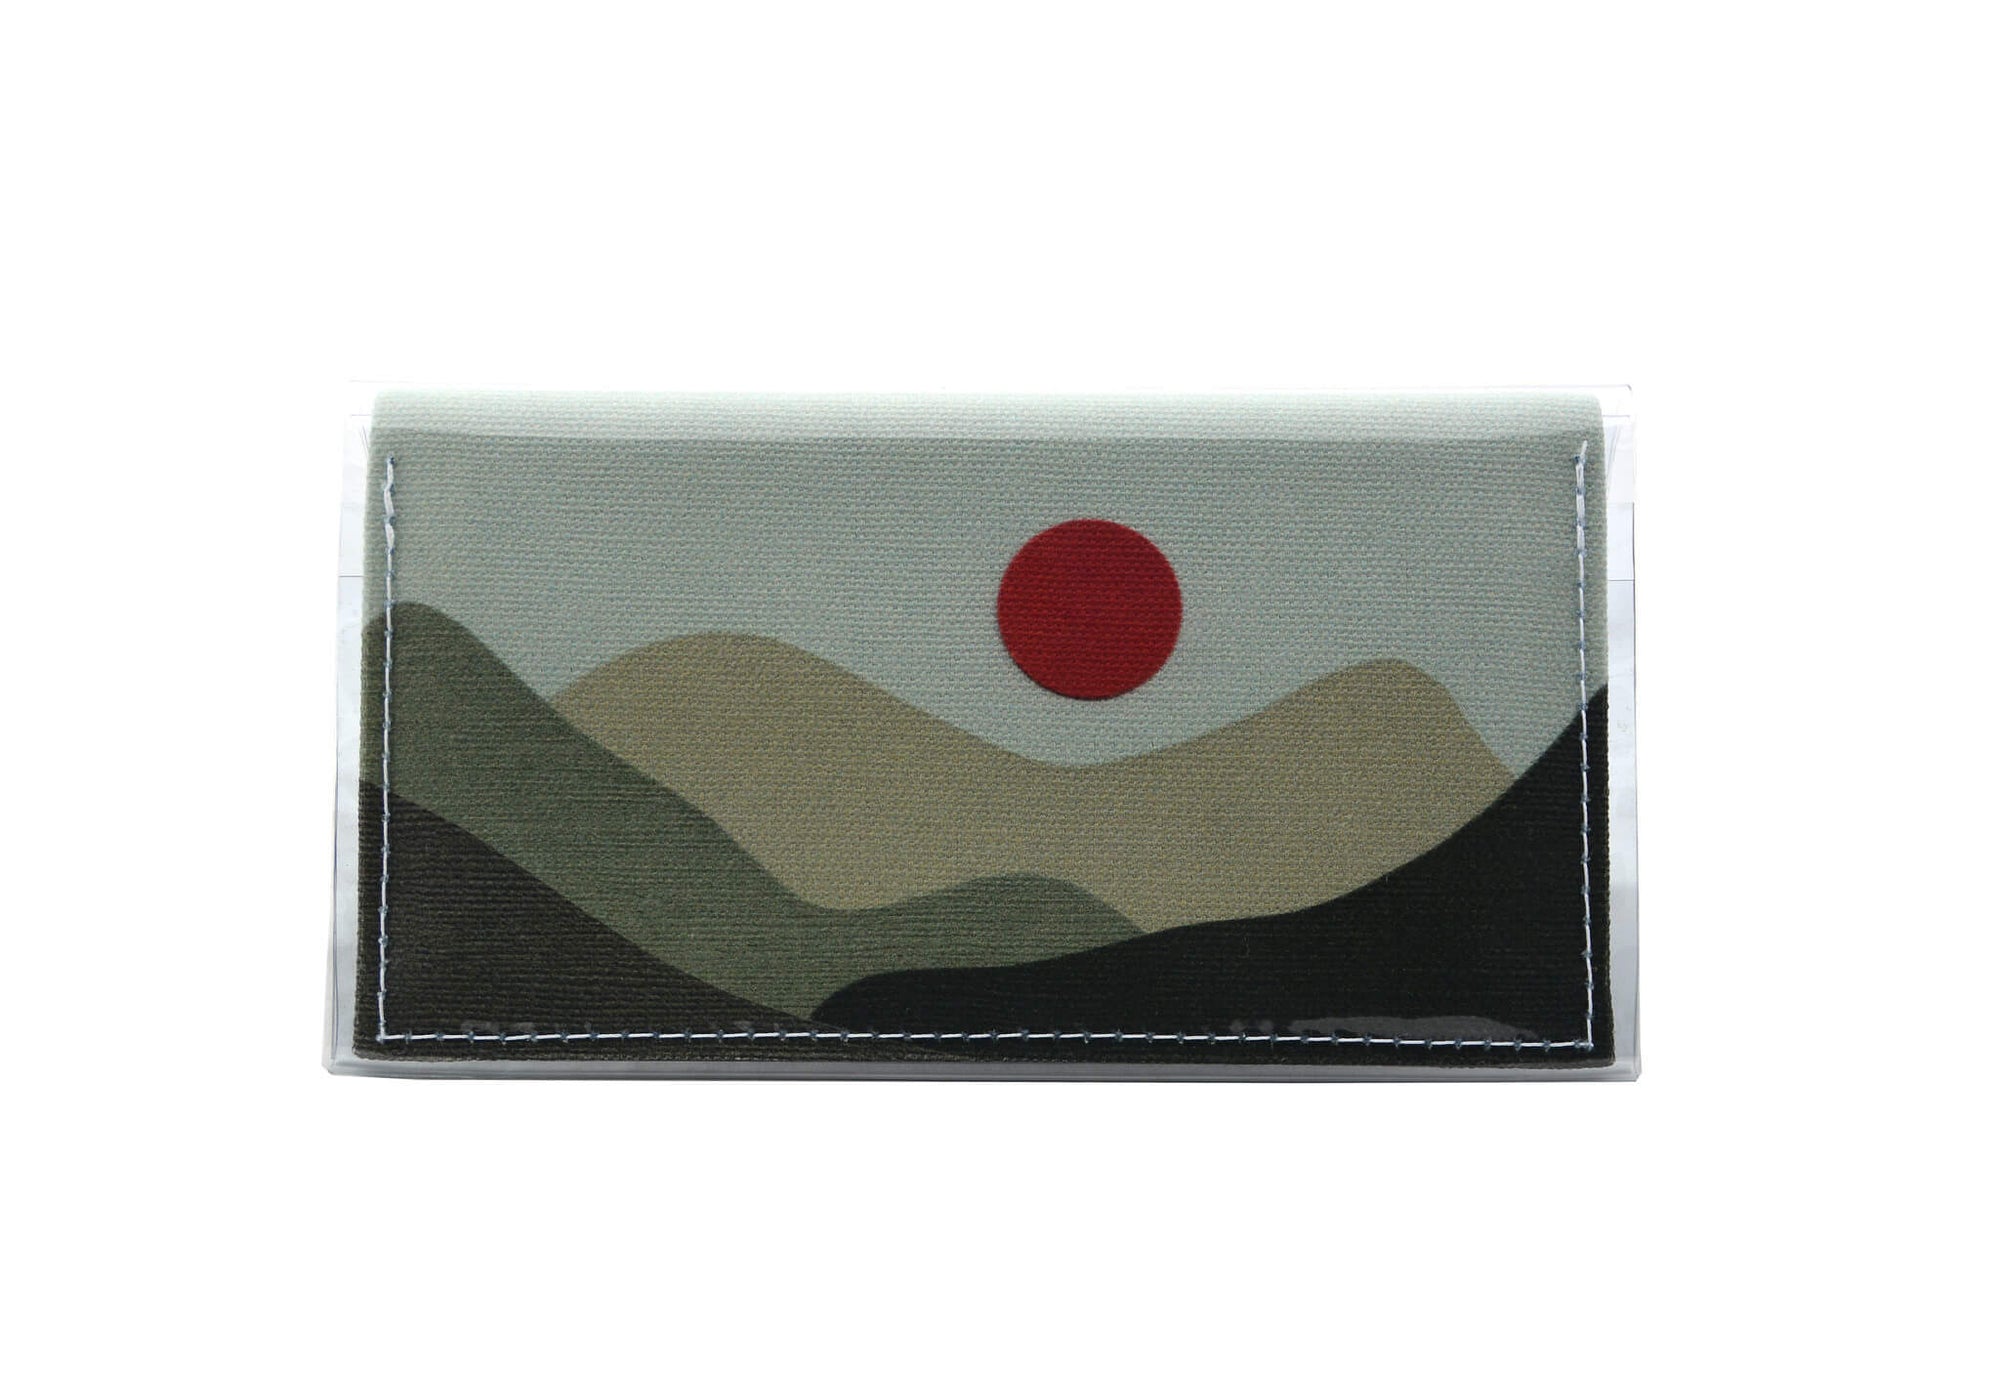 This is an image of the rear of a Kitty Came Home bifold mini purse clutch in the 'Moondance' design by Satin and Tat. A blood red full moon floats above a landscape of towering dark green hills. This is the small size.